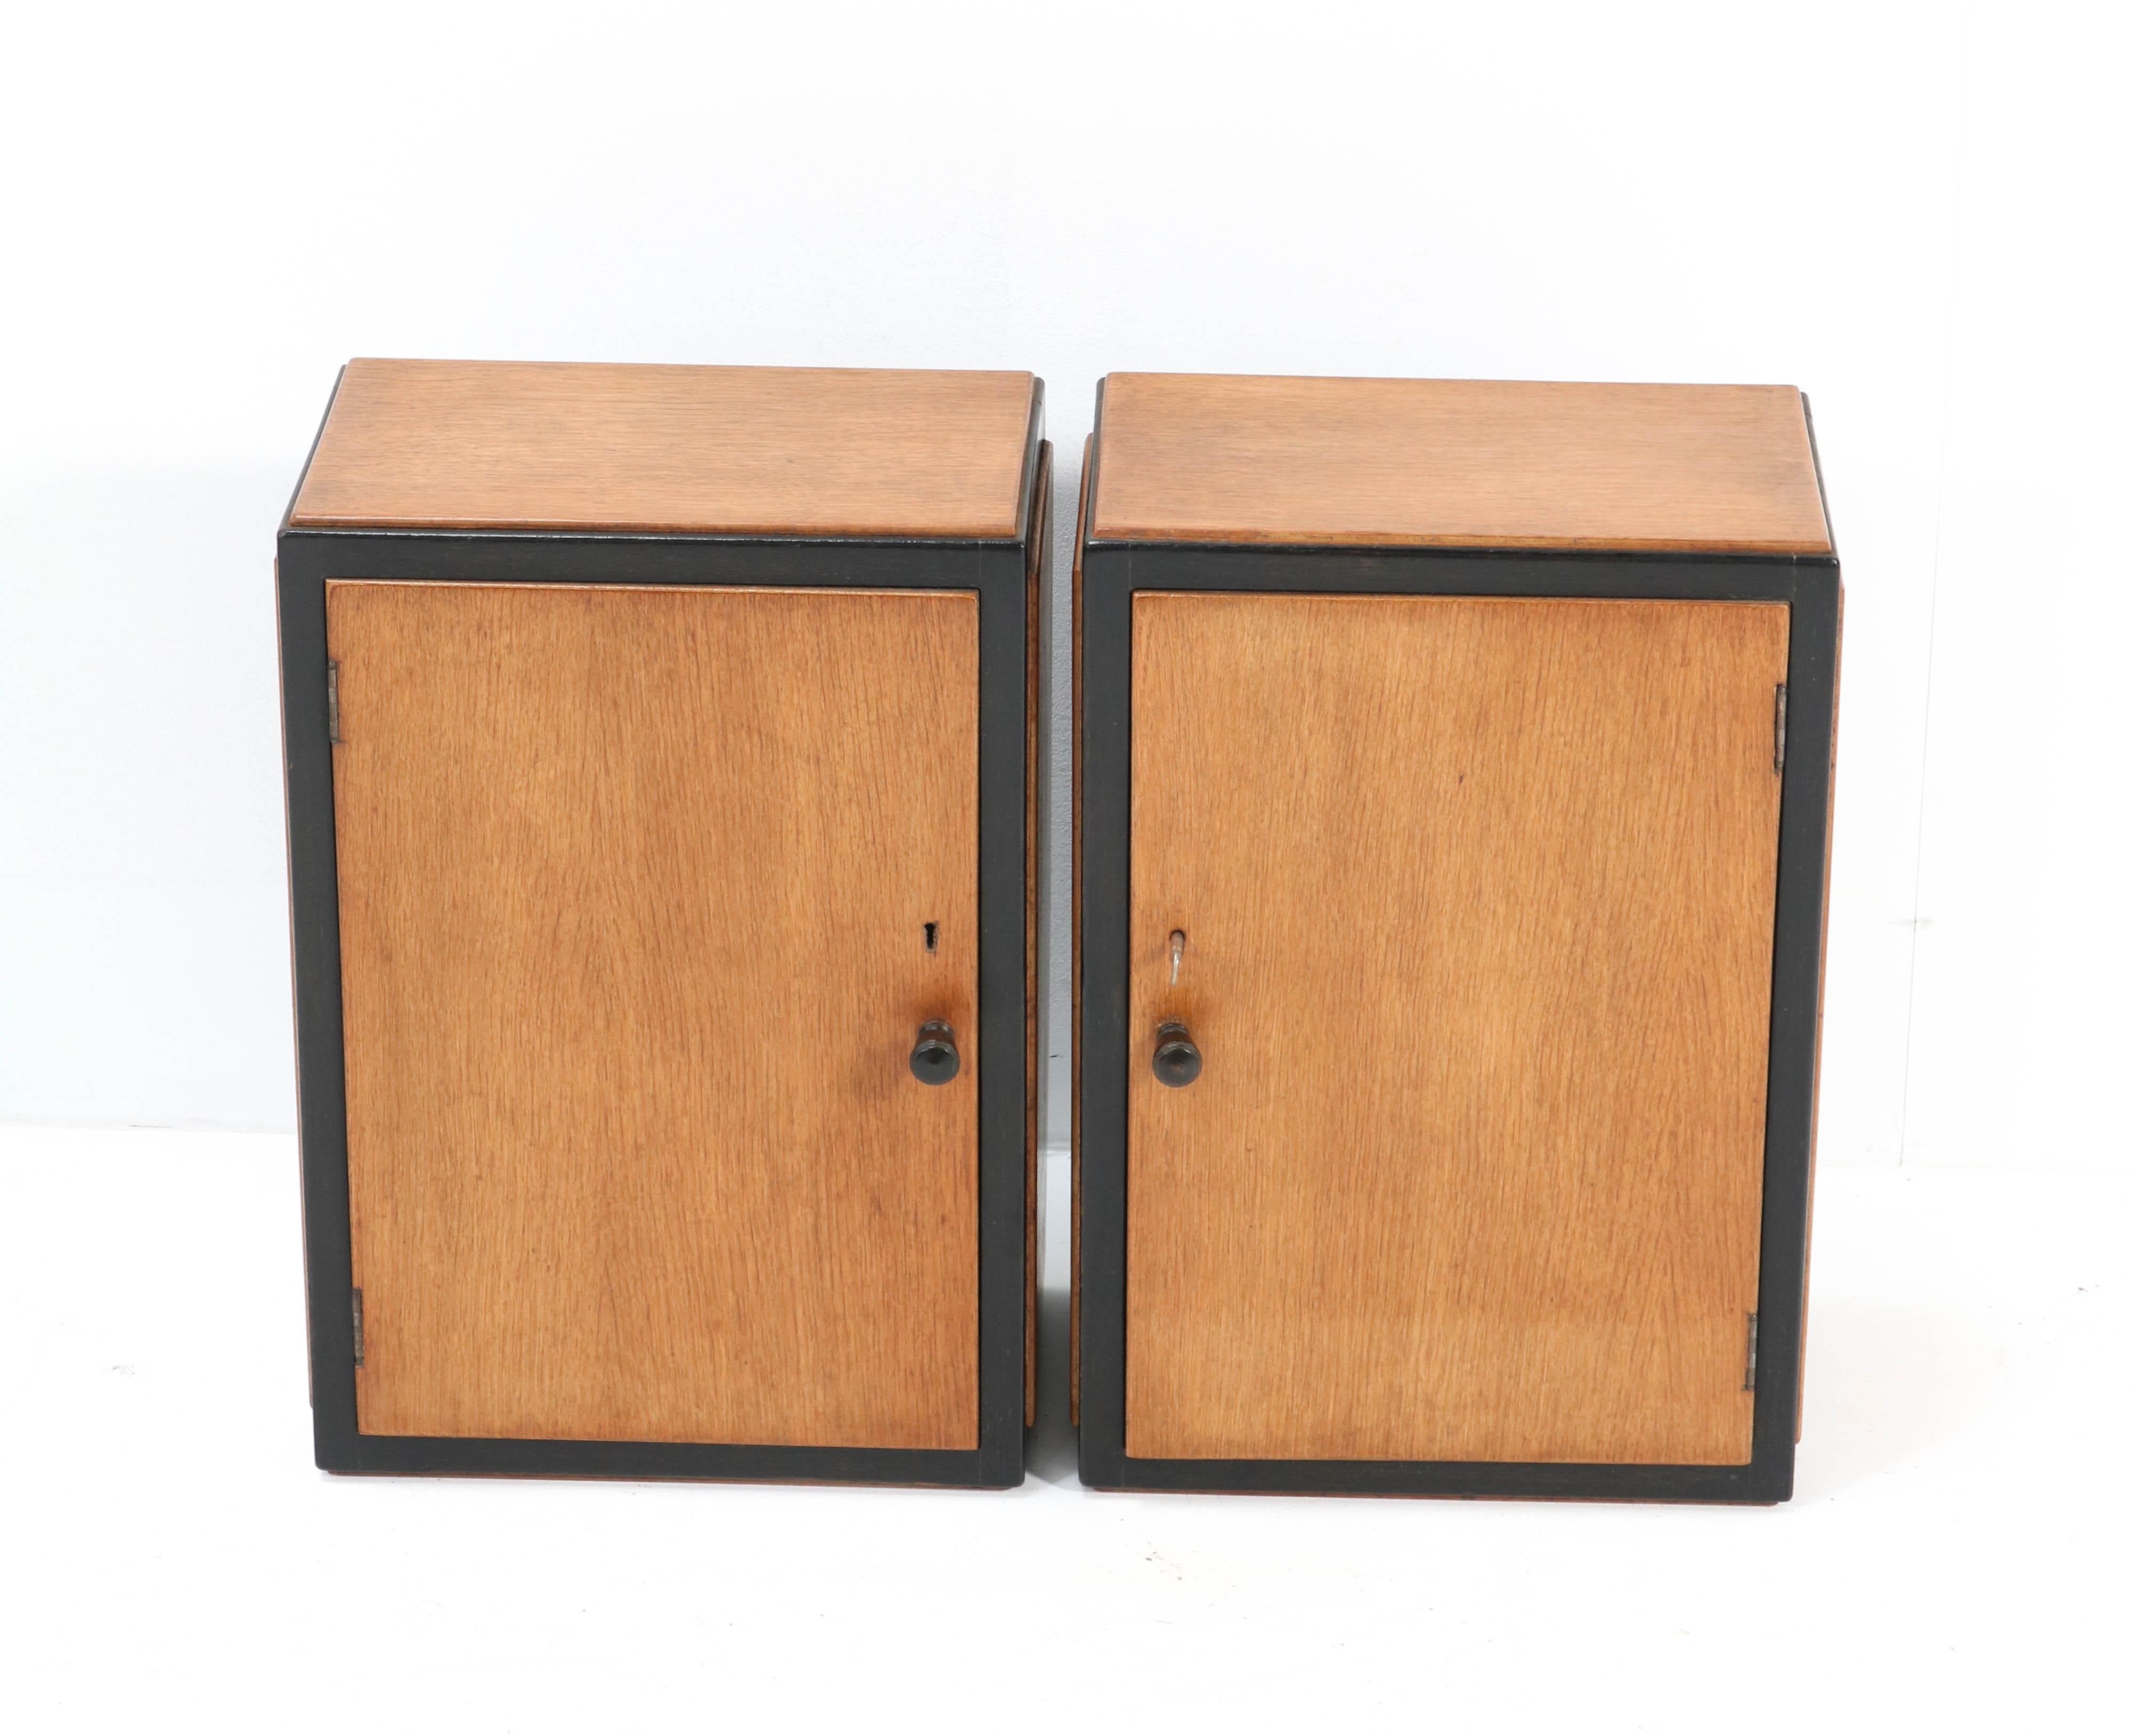 Wonderful and rare pair of Art Deco Haagse School wall cabinets.
Design by Meubelfabriek R.H. Nanninga Groningen.
Striking Dutch design from the 1920s.
Solid oak with oak veneer and original black lacquered lining.
 